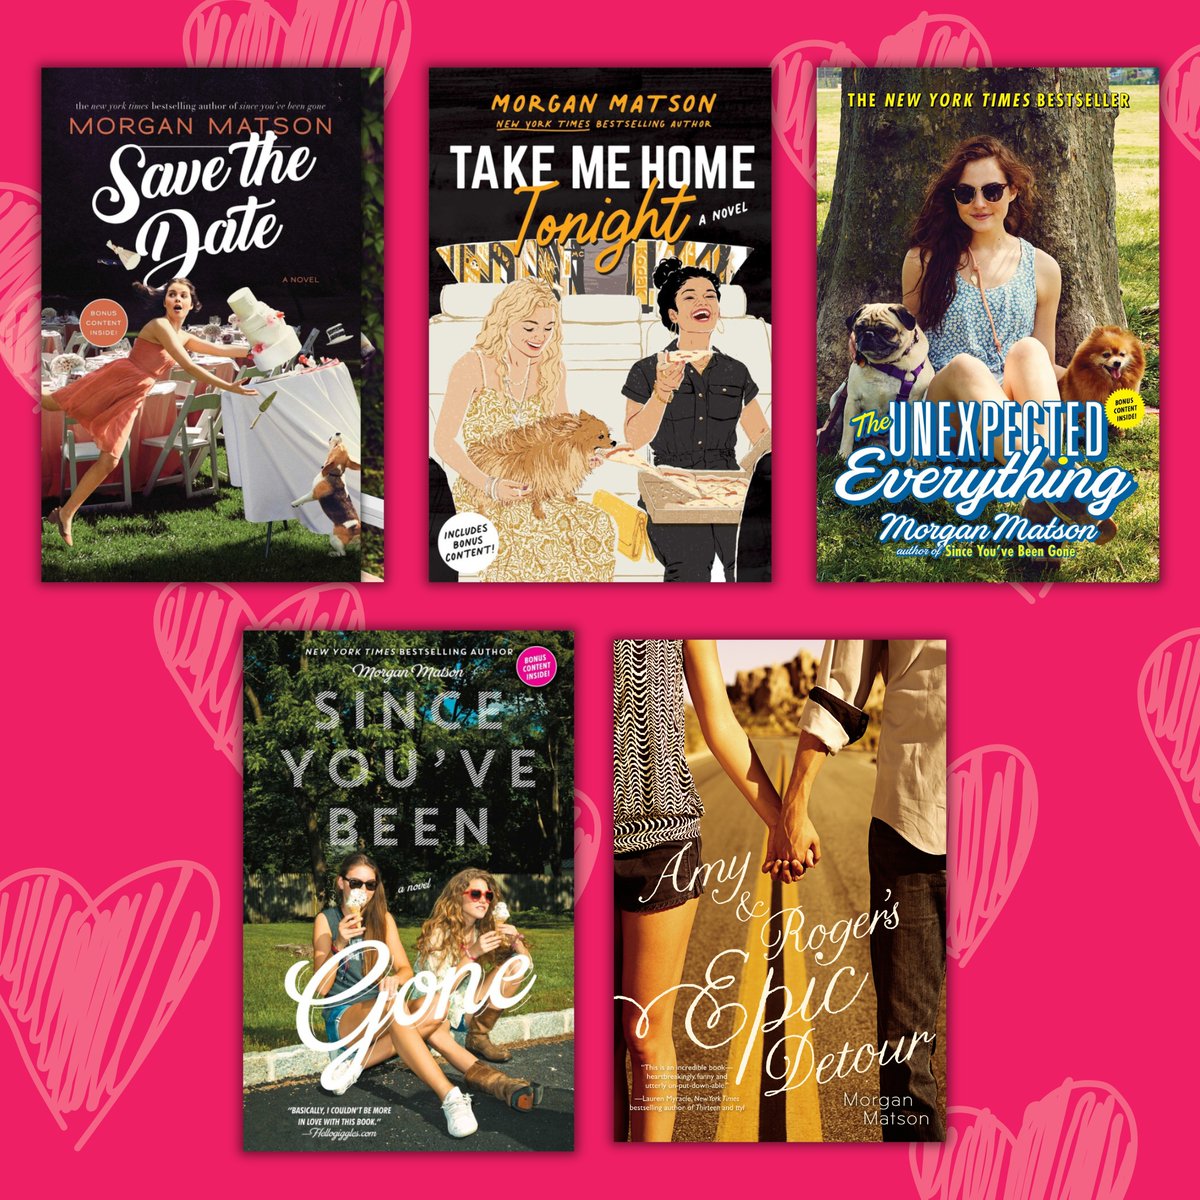 Did you know that you can read these amazing Morgan Matson books for FREE during #MorganMatsonMay? Start reading here: spr.ly/6012jpJTe @morgan_m